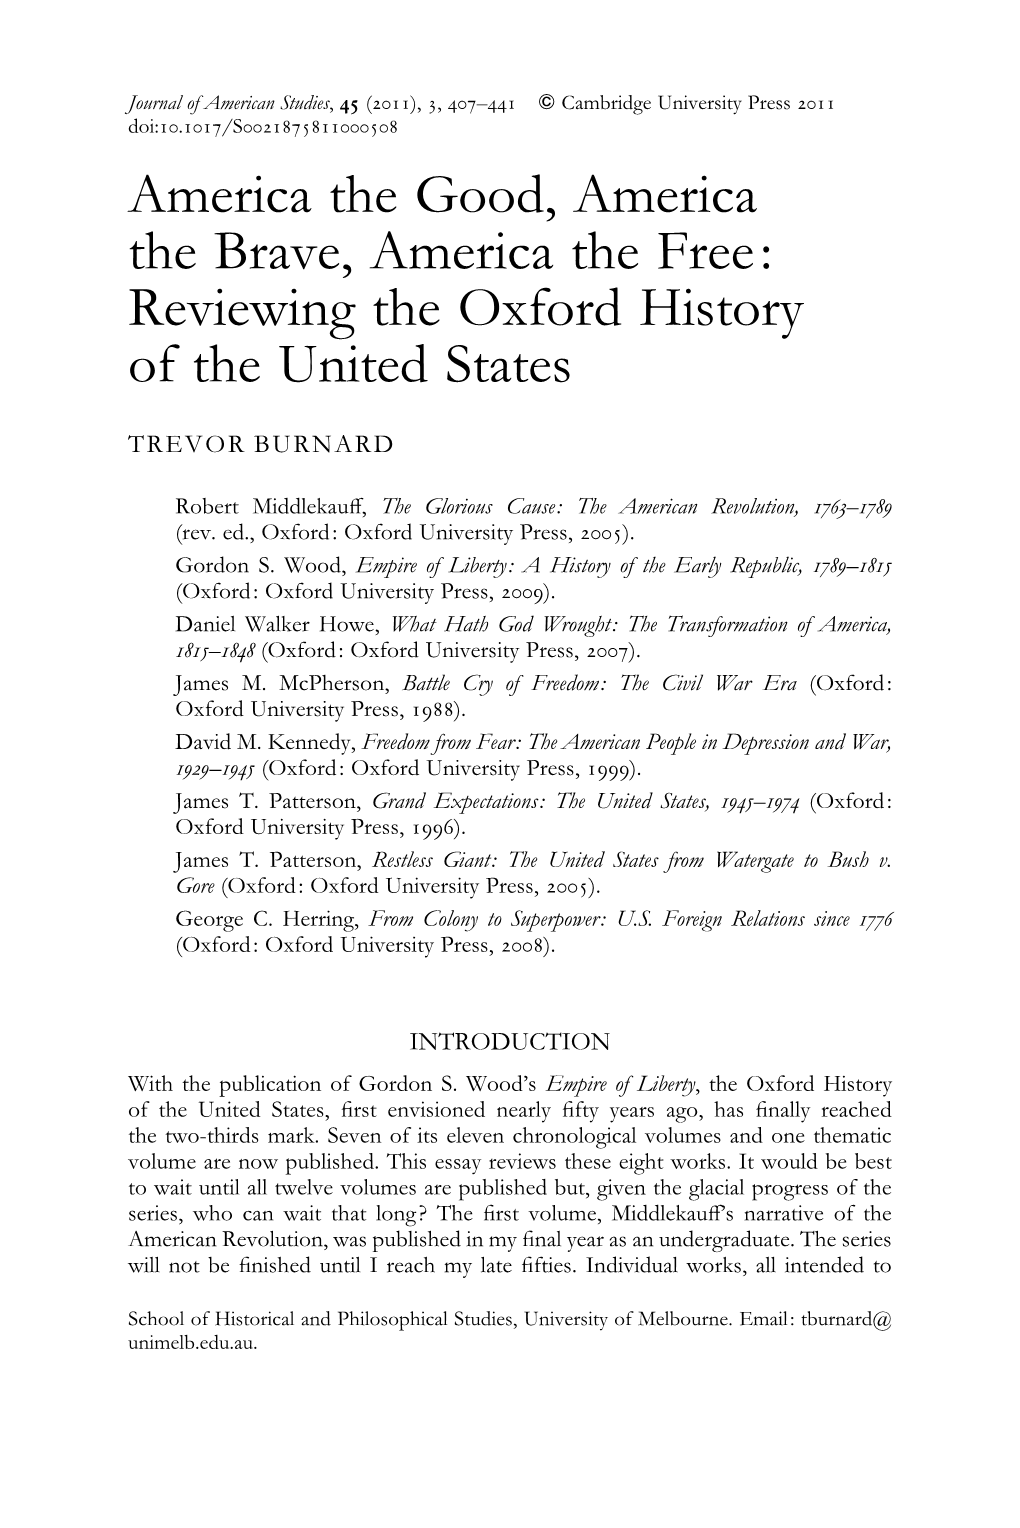 Reviewing the Oxford History of the United States